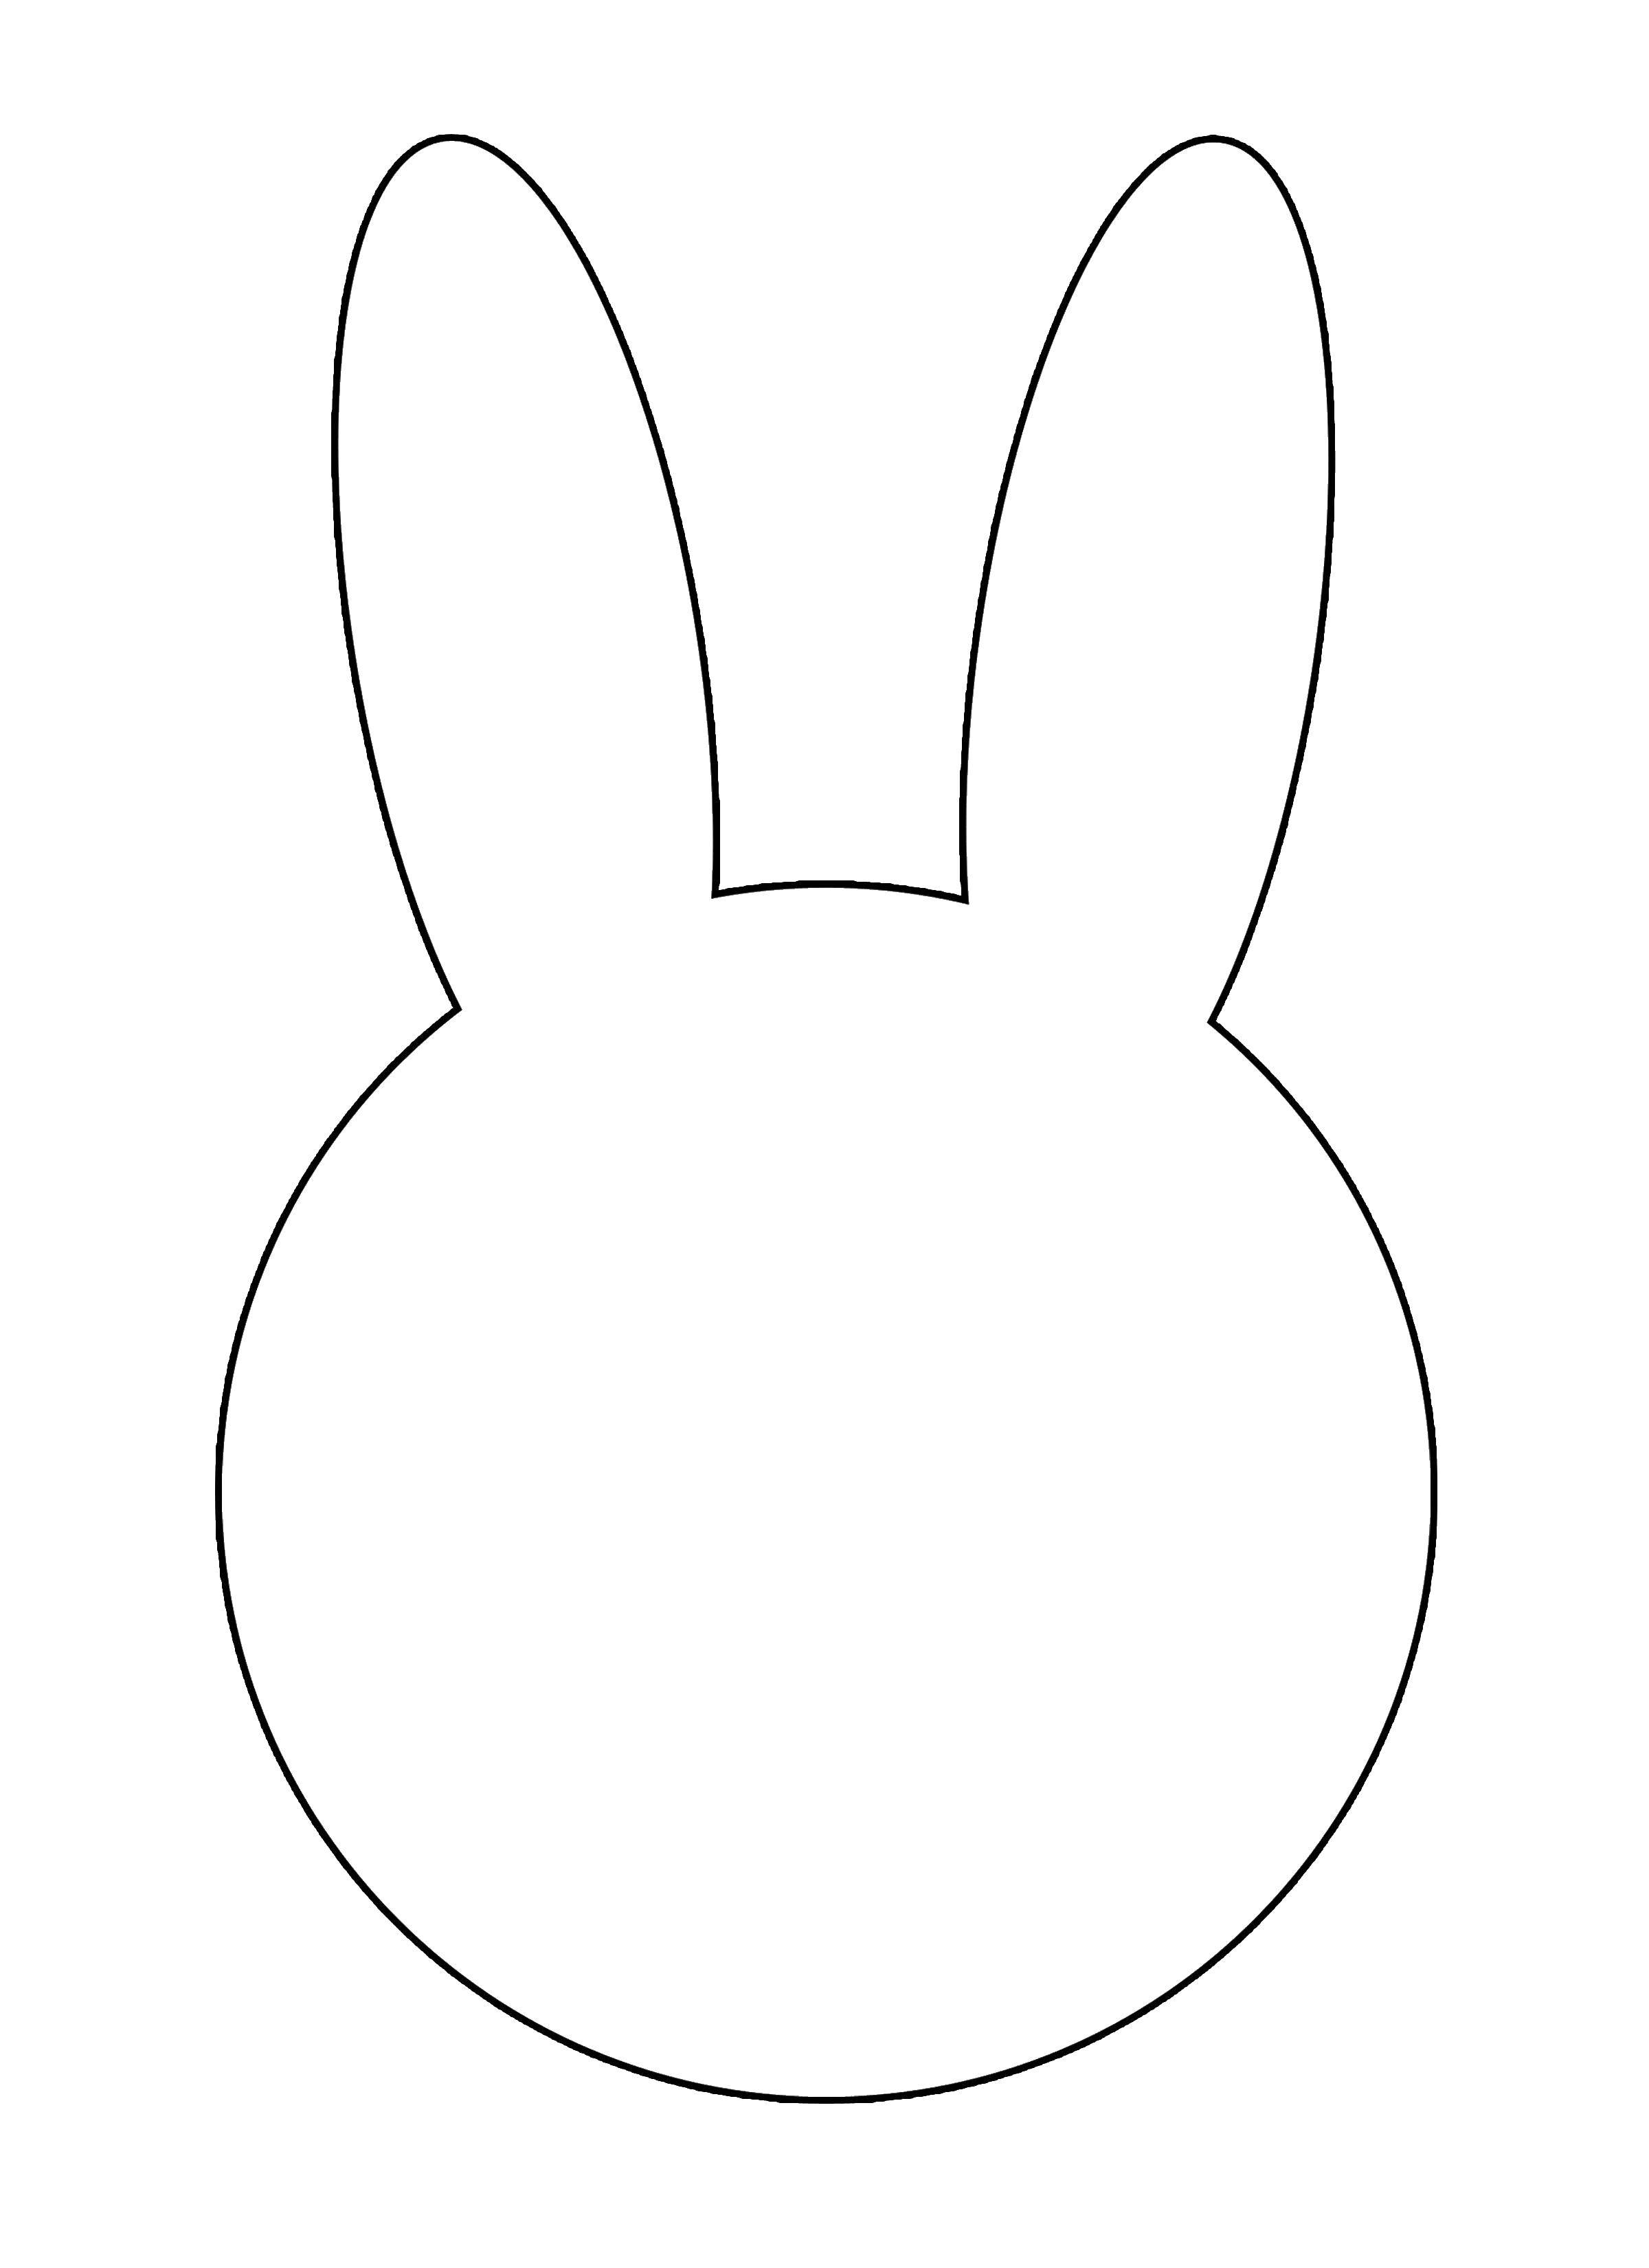 Coloring Hare. Category The contour of the hare to cut. Tags:  Bunny ears.